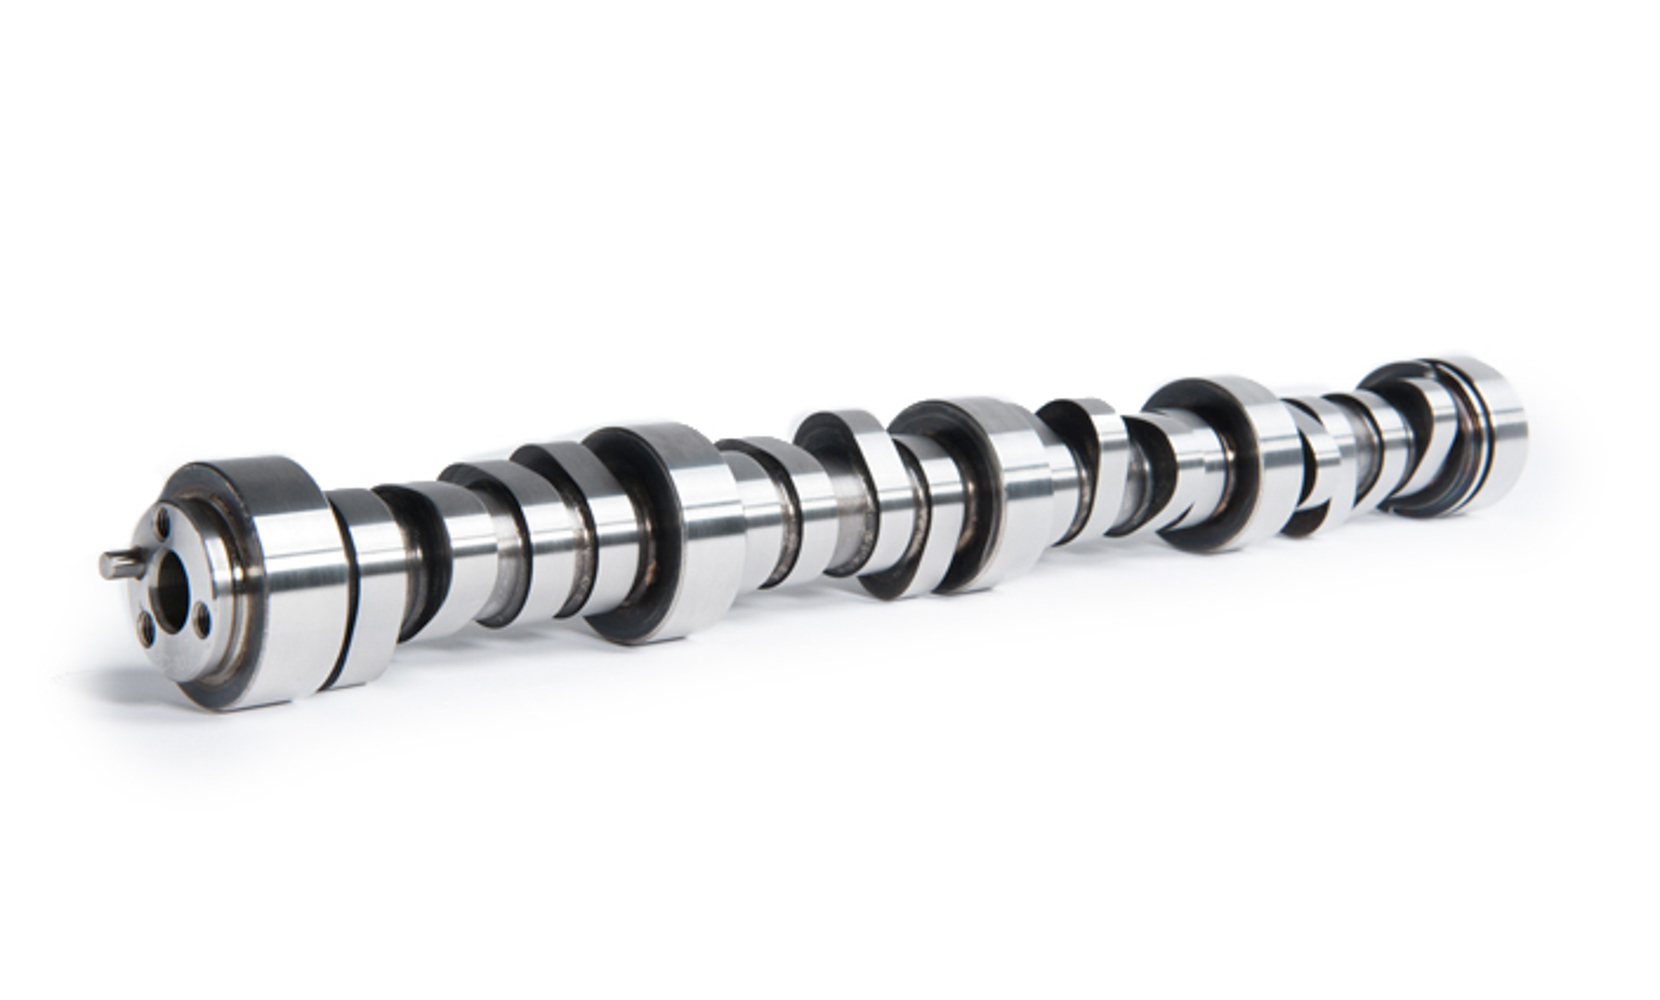 Cam Motion 03-01-0040 Camshaft, Street King, Hydraulic Roller, Lift 0.621 / 0.604 in, Duration 248 / 256, 112 LSA, 3800 / 7000 RPM, GM LS-Series, Each